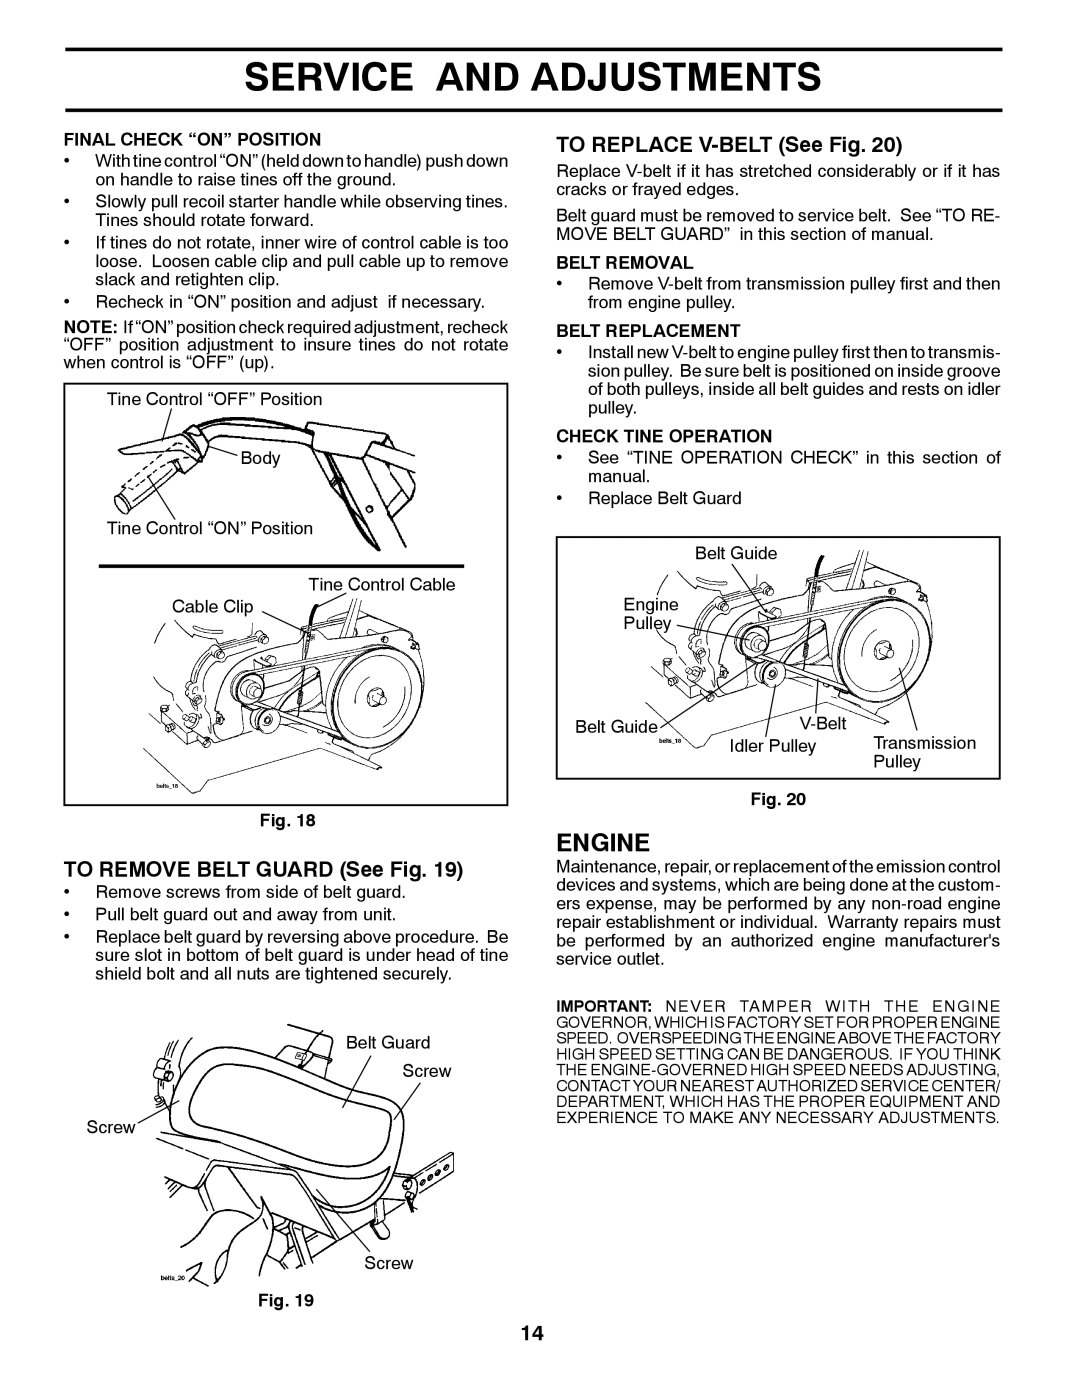 Poulan 96082001900 TO REMOVE BELT GUARD See Fig, TO REPLACE V-BELTSee Fig, Final Check “On” Position, Belt Removal, Engine 